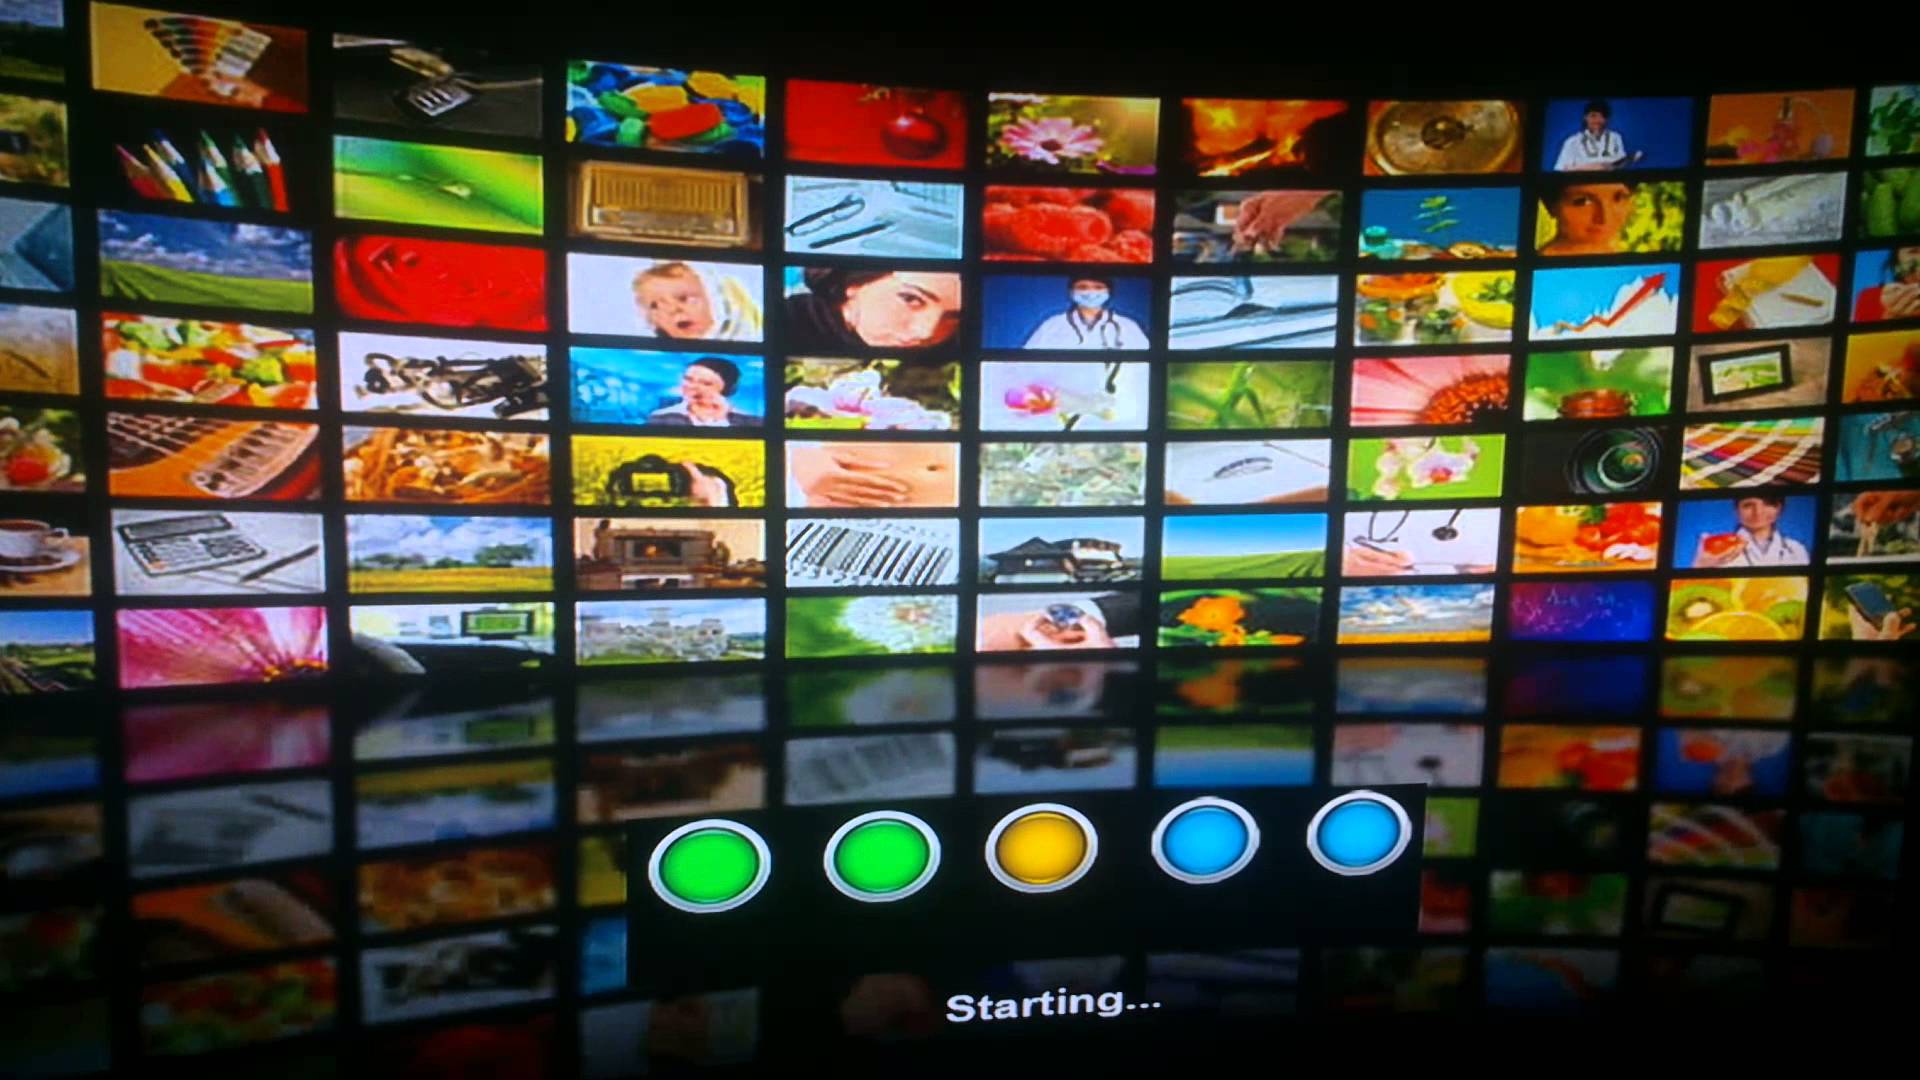 How to find IPTV service provider